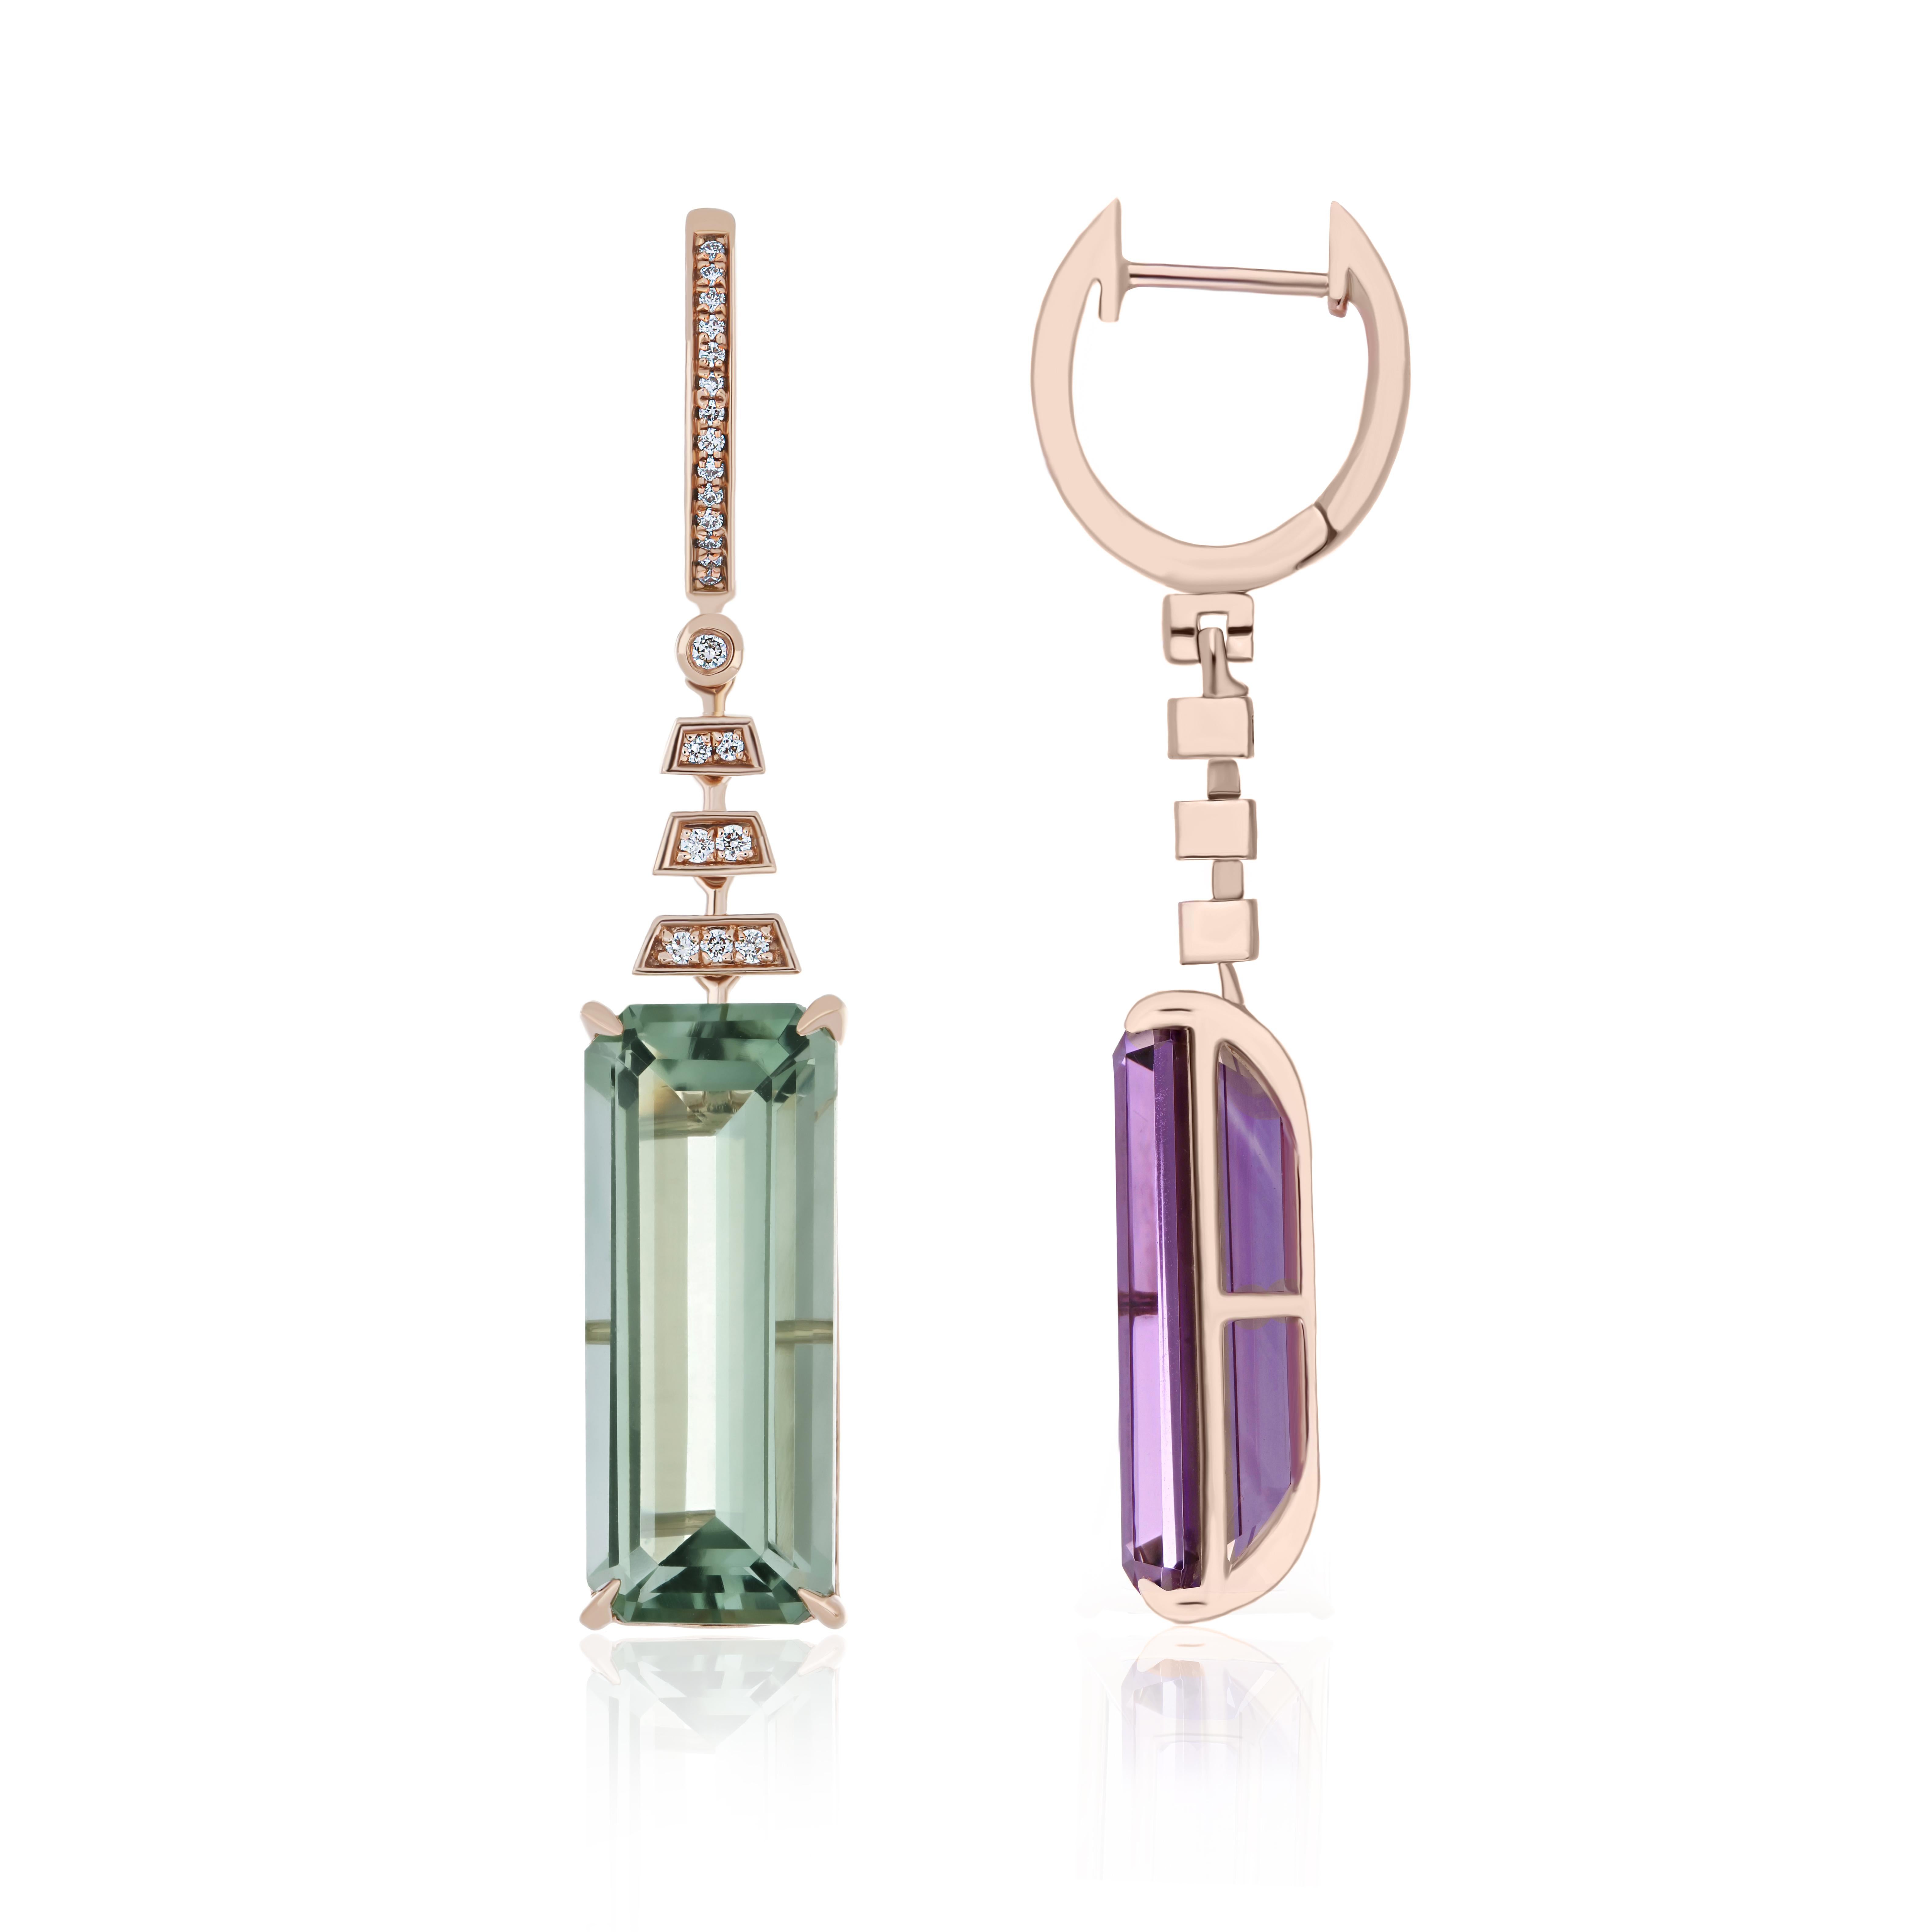 Elegant and Exquisitely Detailed Mis-matched pair of 14Karat Rose Gold Earring set with Octagon Cut Mint Quartz weighing approx.7.45Cts & Octagon Cut Amethyst weighing approx. 7.10Cts, and accented micro prove Set Diamond weighing approx. 0.17Cts